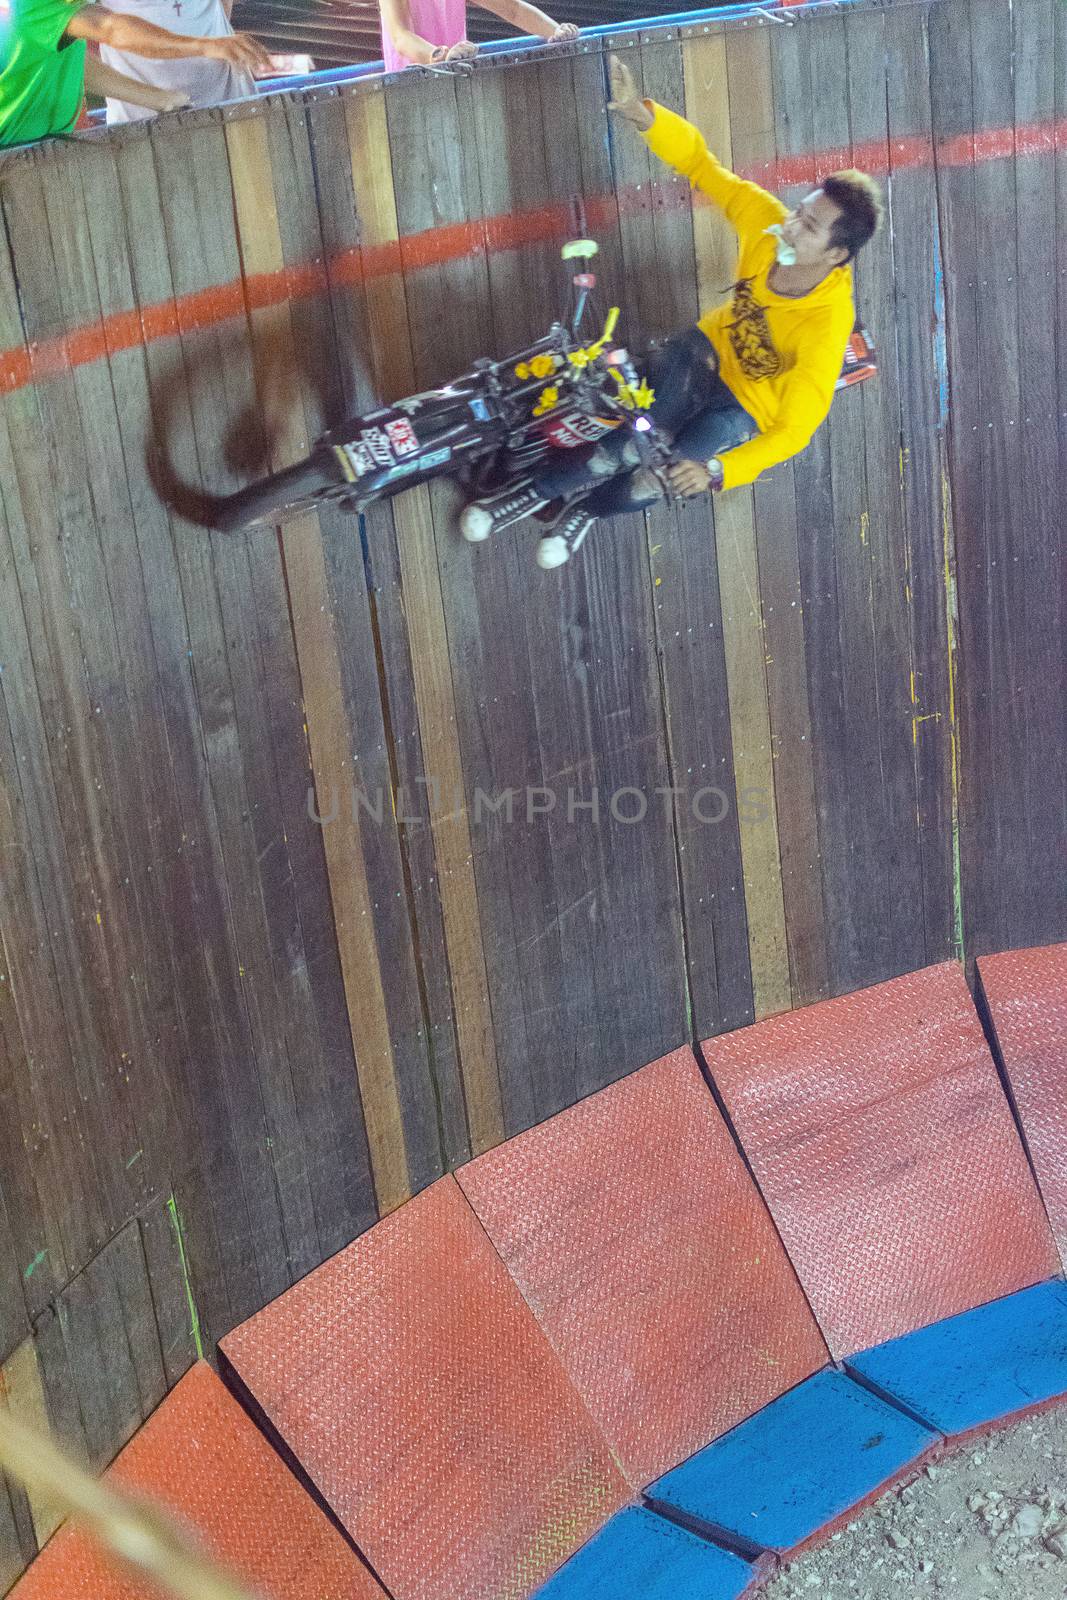 Bangkok, Thailand - January 10, 2016 : Unidentified asia rider motorcycle extreme show by climb and run on the circle wooden wall in a temple festival.